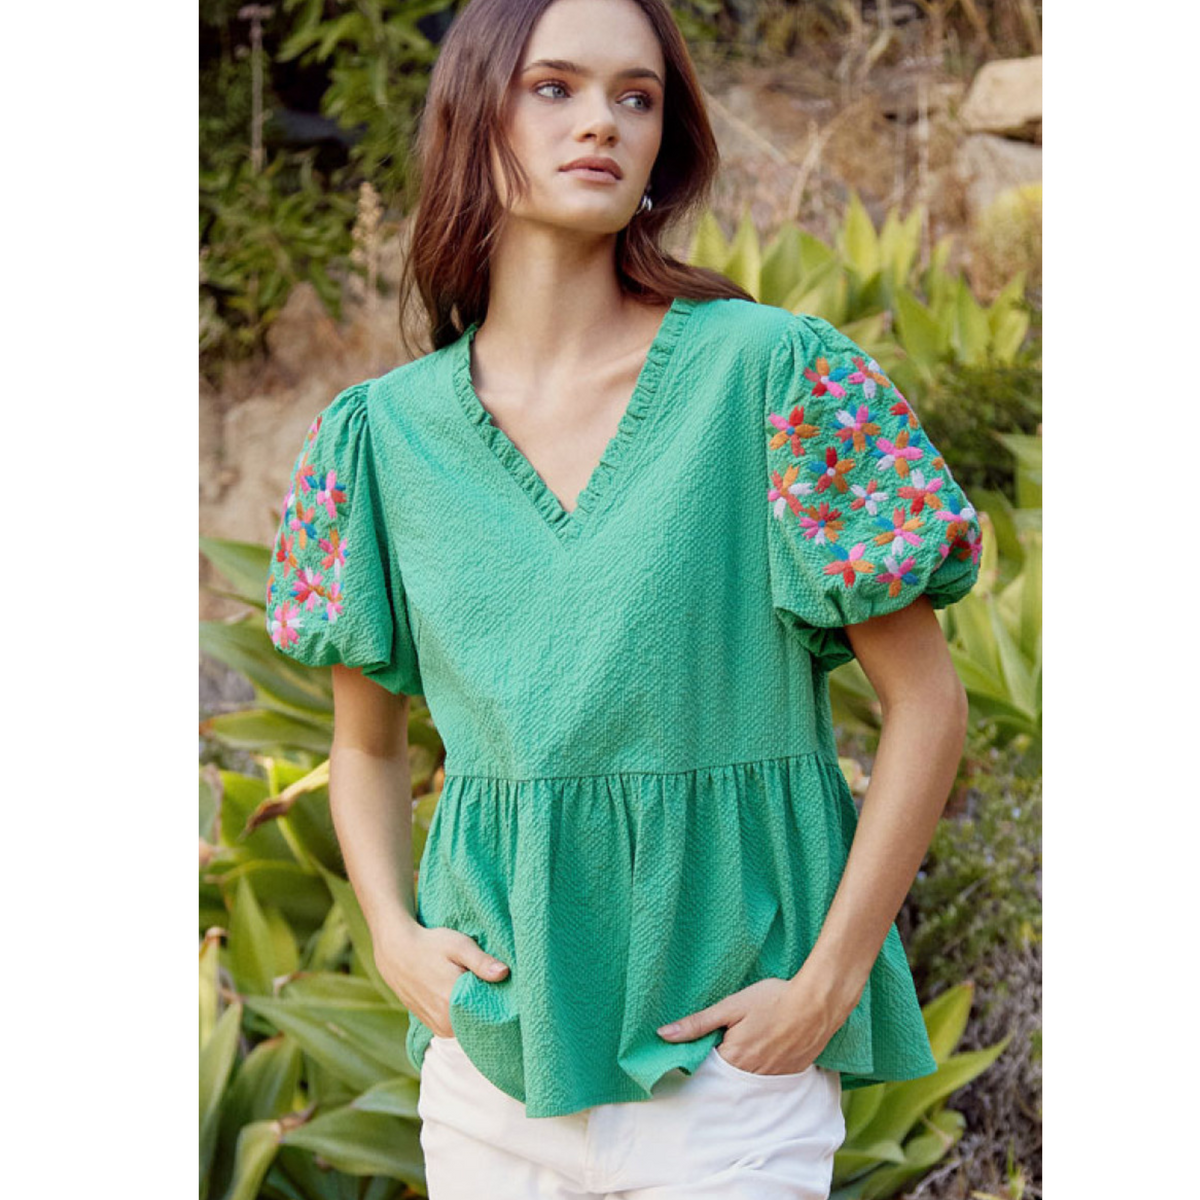 The Florence Top